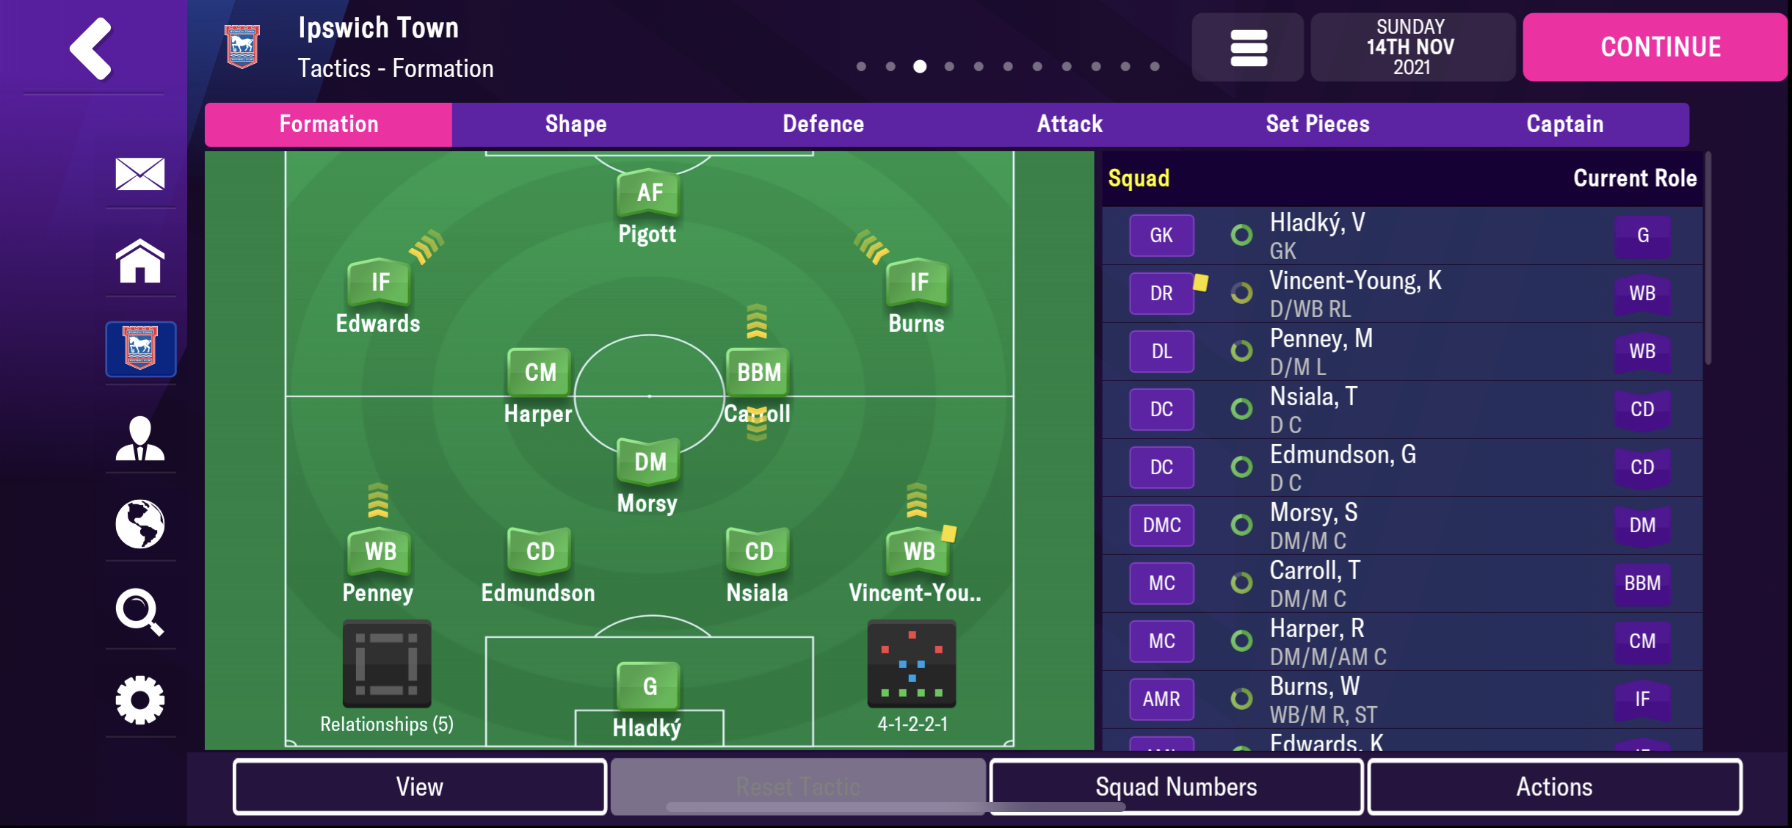 Football Manager 2023 Mobile - New Features - Official Site